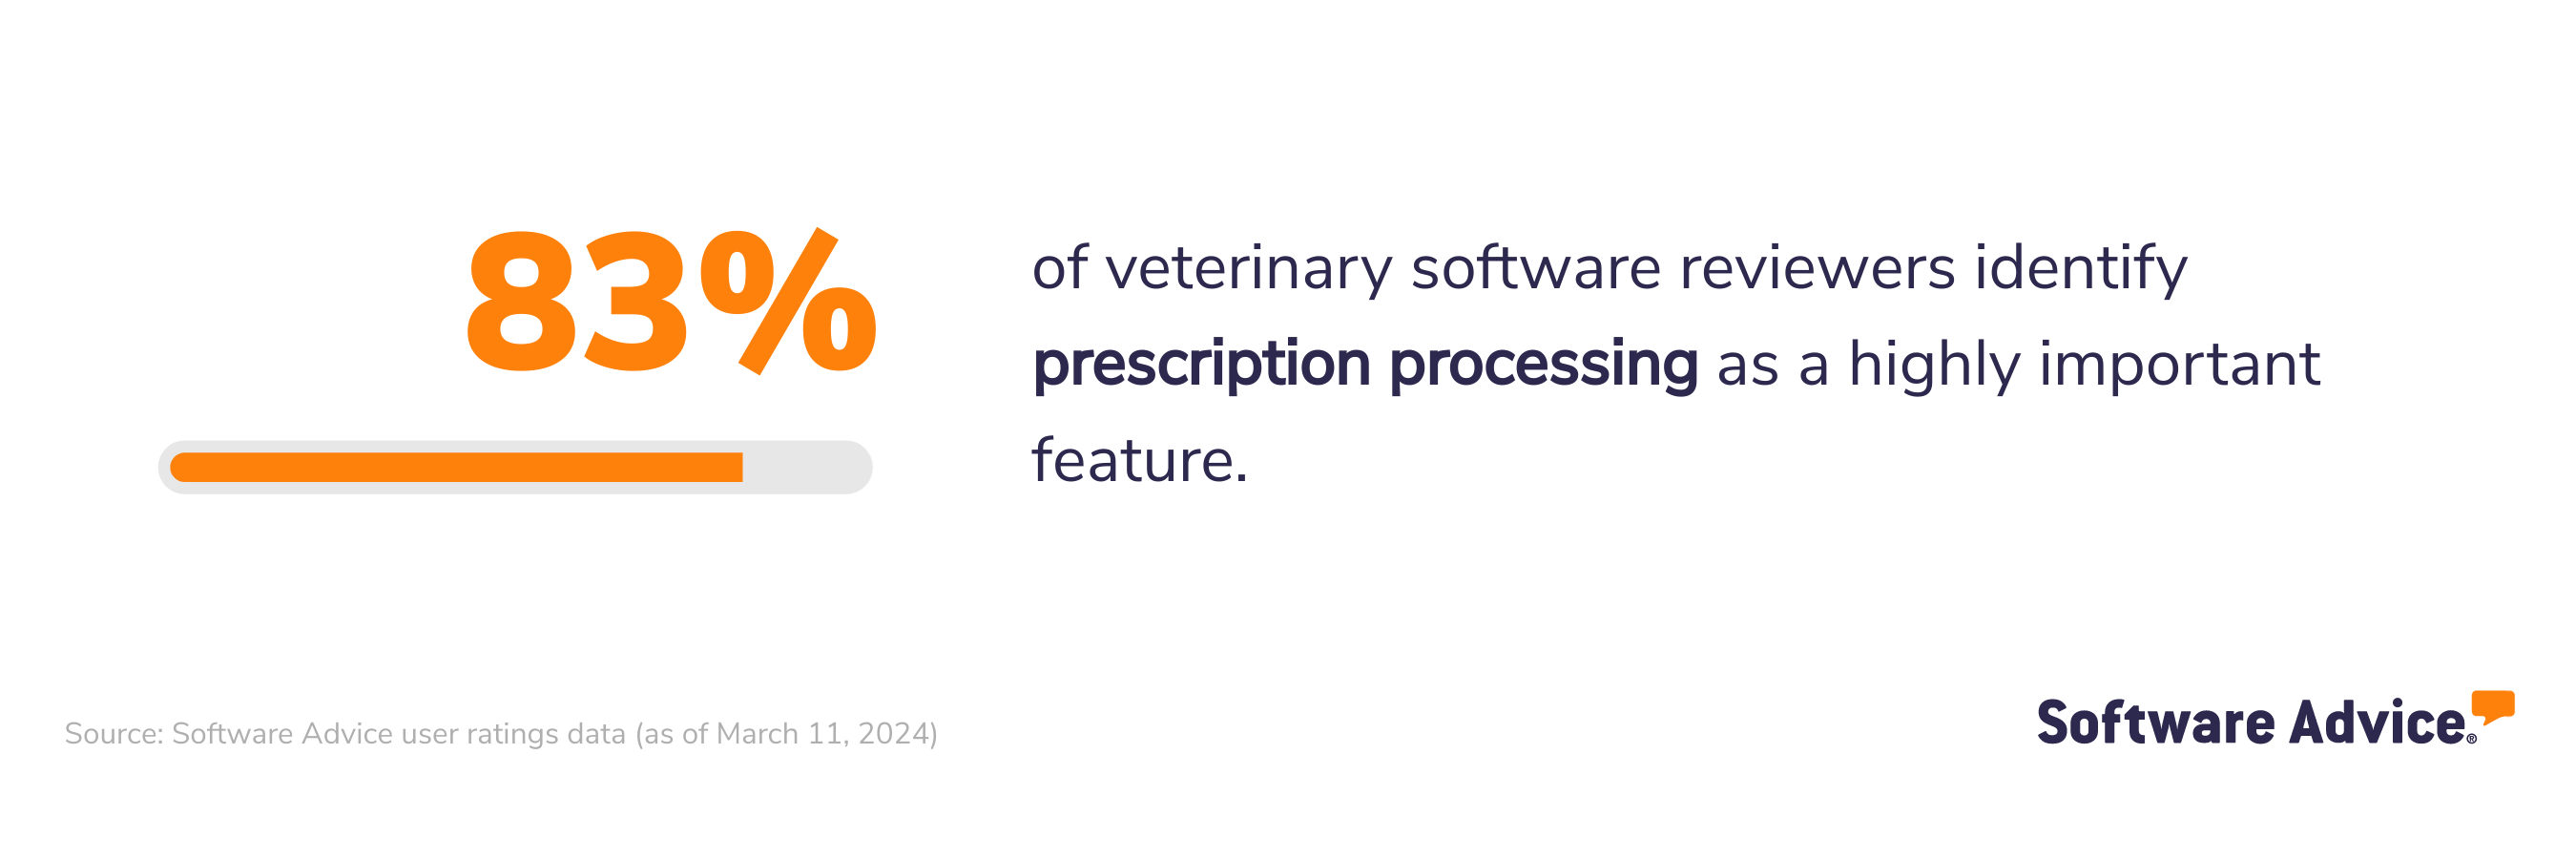 83% of veterinary software reviewers identify prescription processing as a highly important feature.